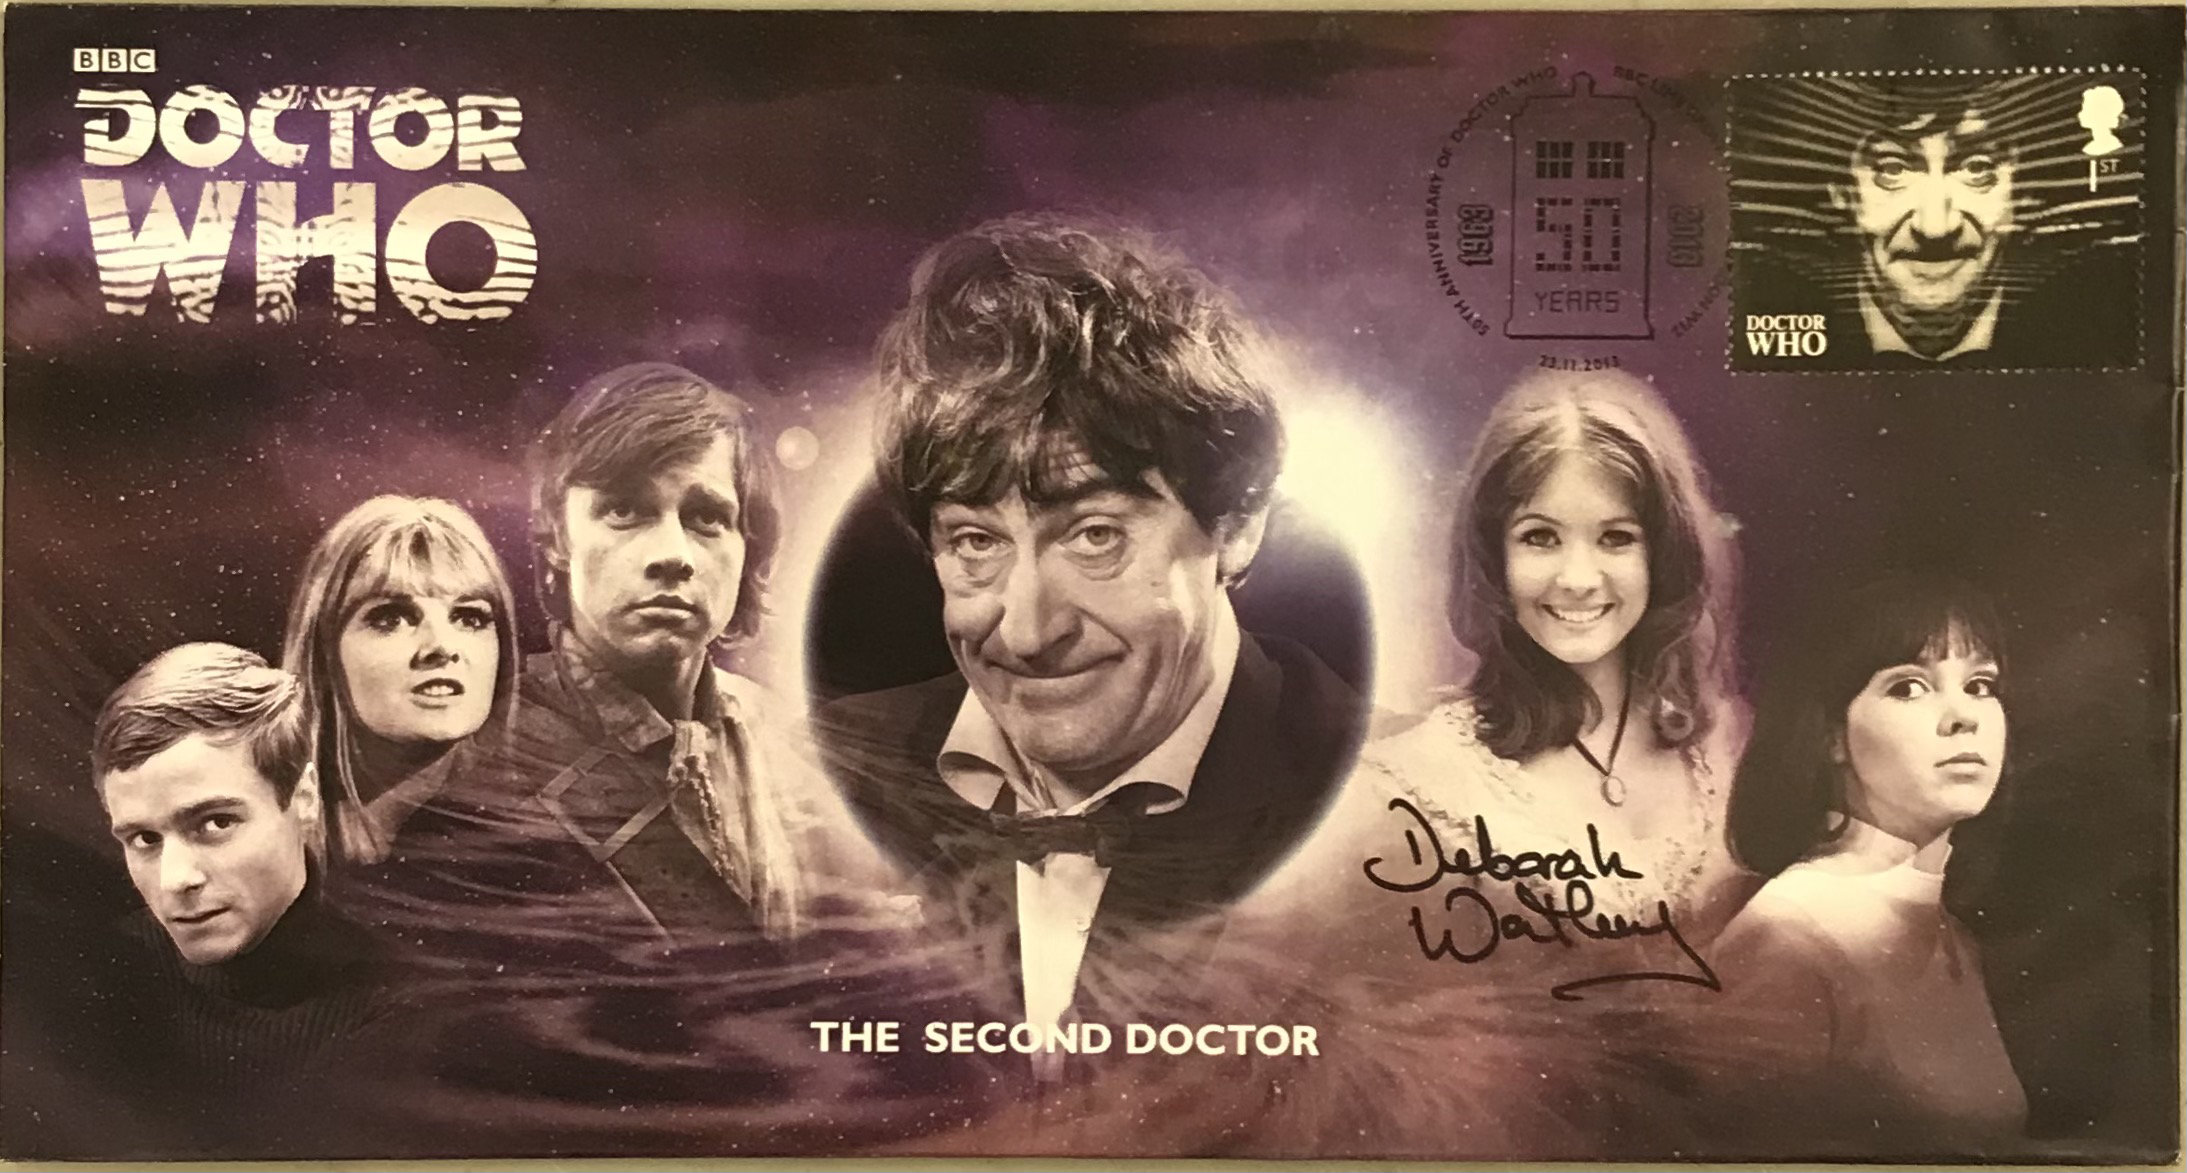 The Second Doctor Who COMPANIONS SERIES Stamp Cover FDC Signed DEBORAH WATLING